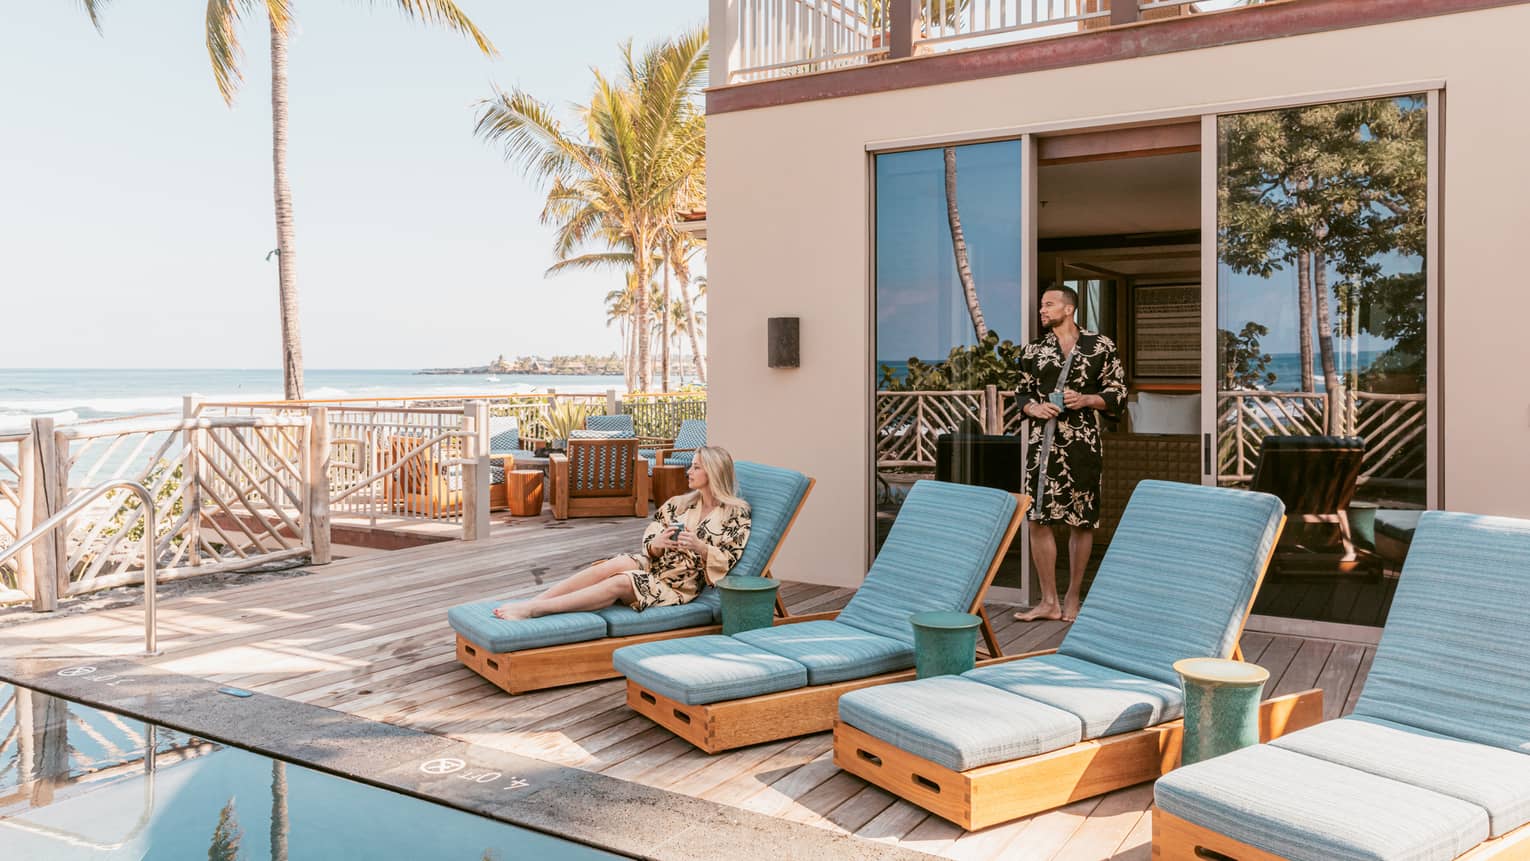 Private pool terrace, woman sits on one of four sun loungers with turquoise cushions